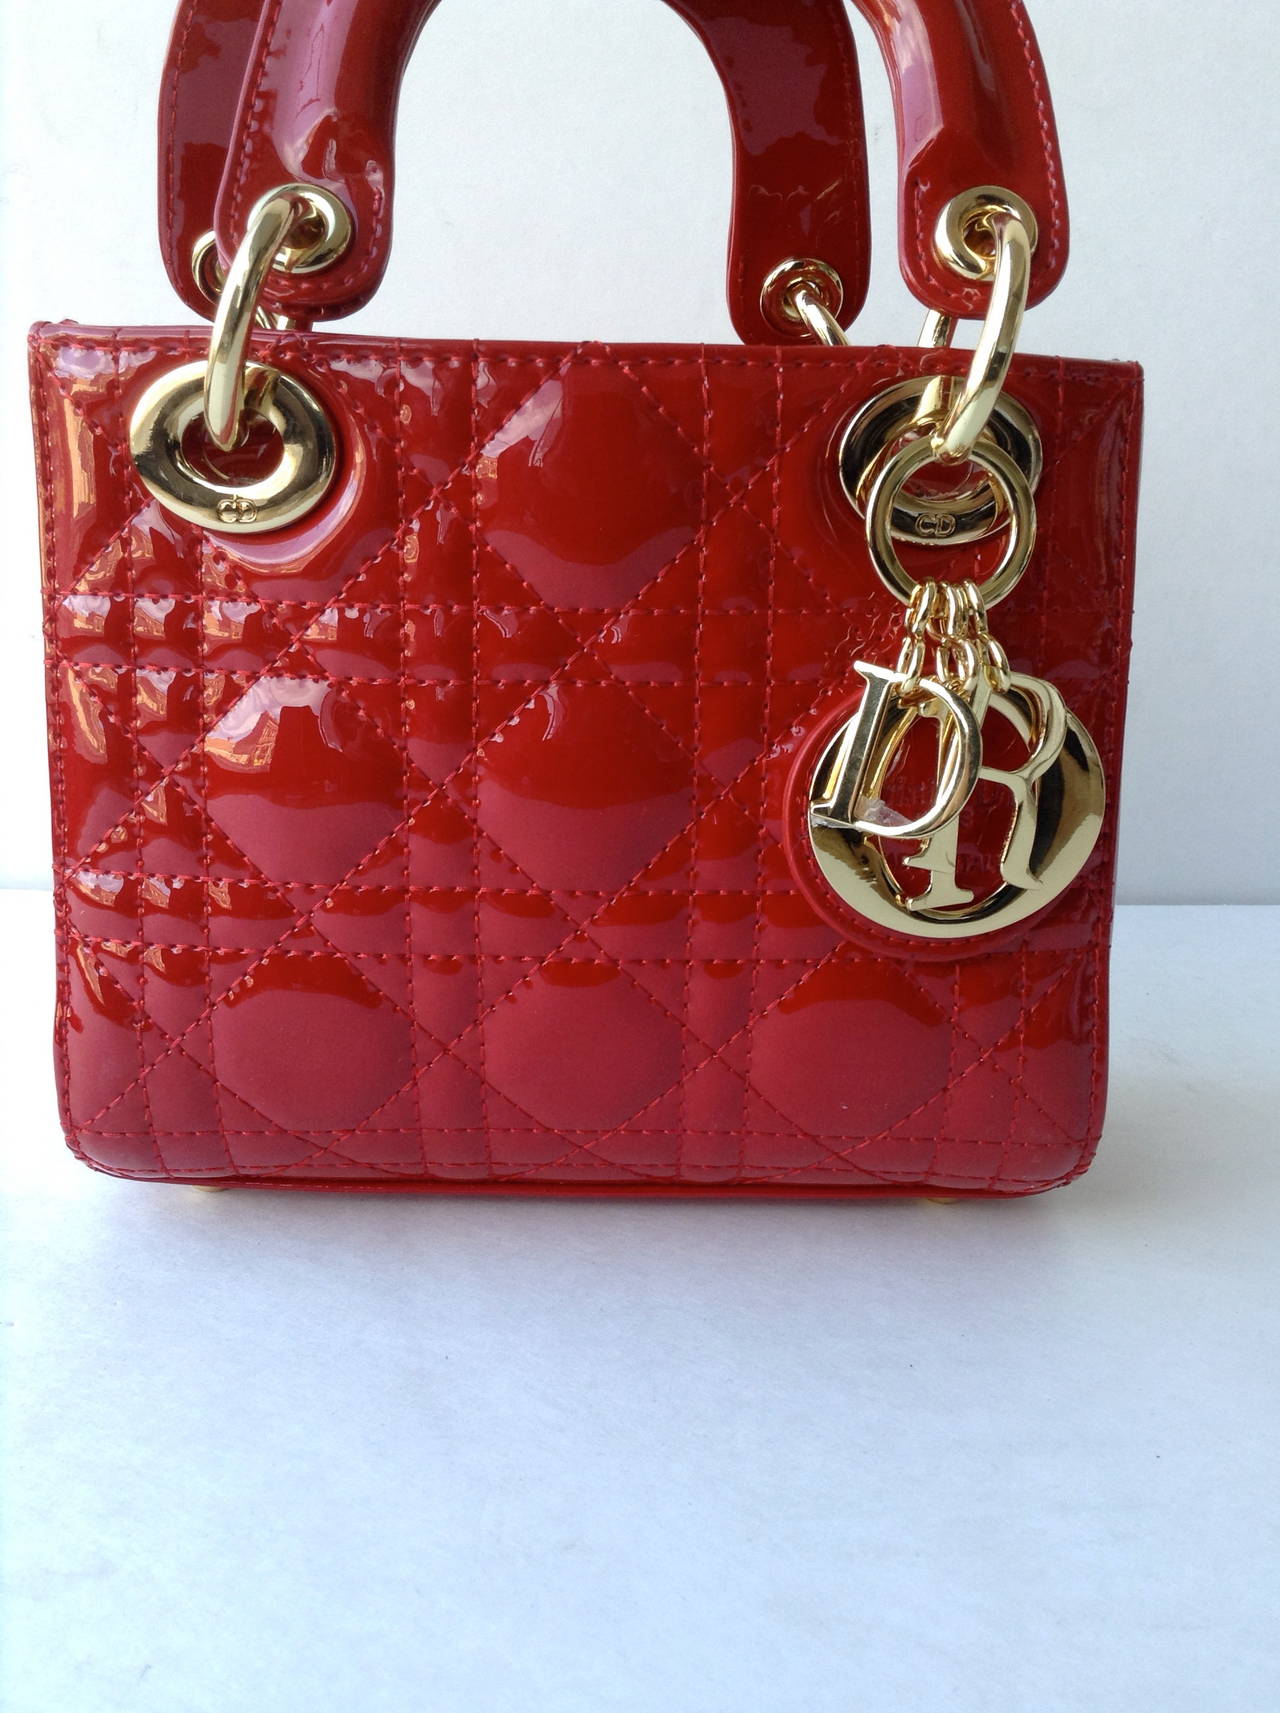 Authentic Christian Dior Lady Dior hand bag in red patent leather. Main access is secured with zipper. Inside has 1 zipper pocket and red fabric lining. Comfortably carried in hand or on shoulder with additional strap.

Made in: Italy

Size: 9.8